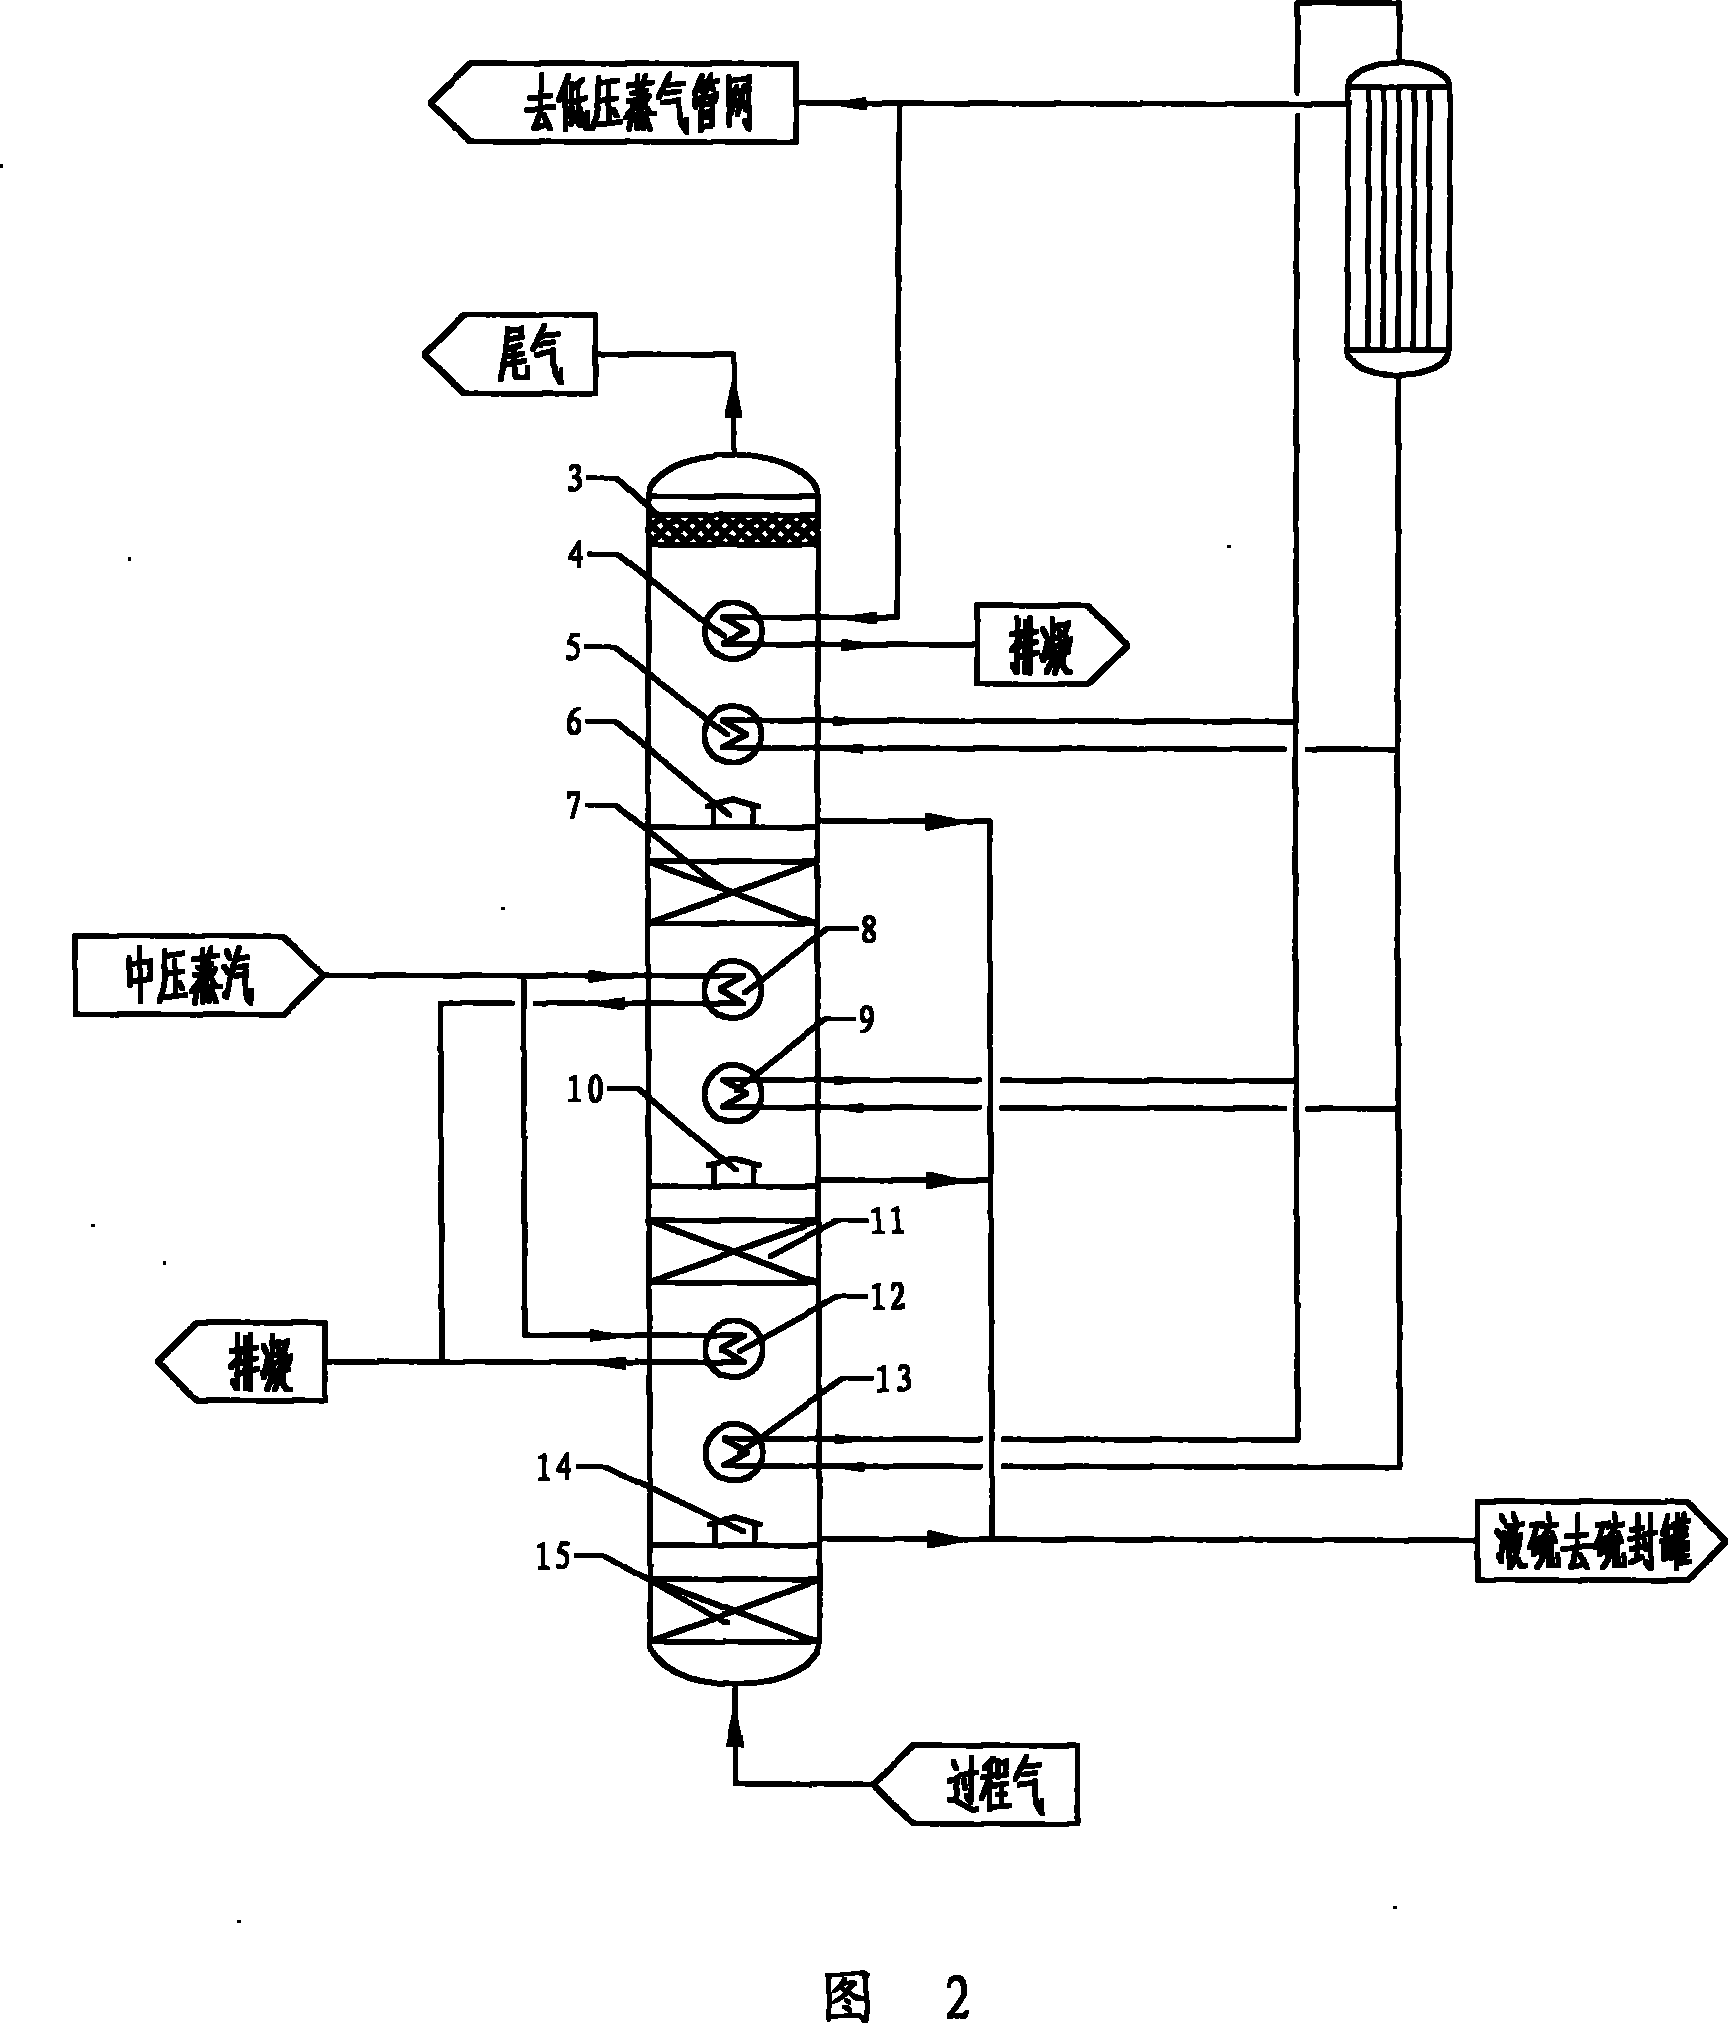 Combined internal thermal cooler sulfur recovery reactor